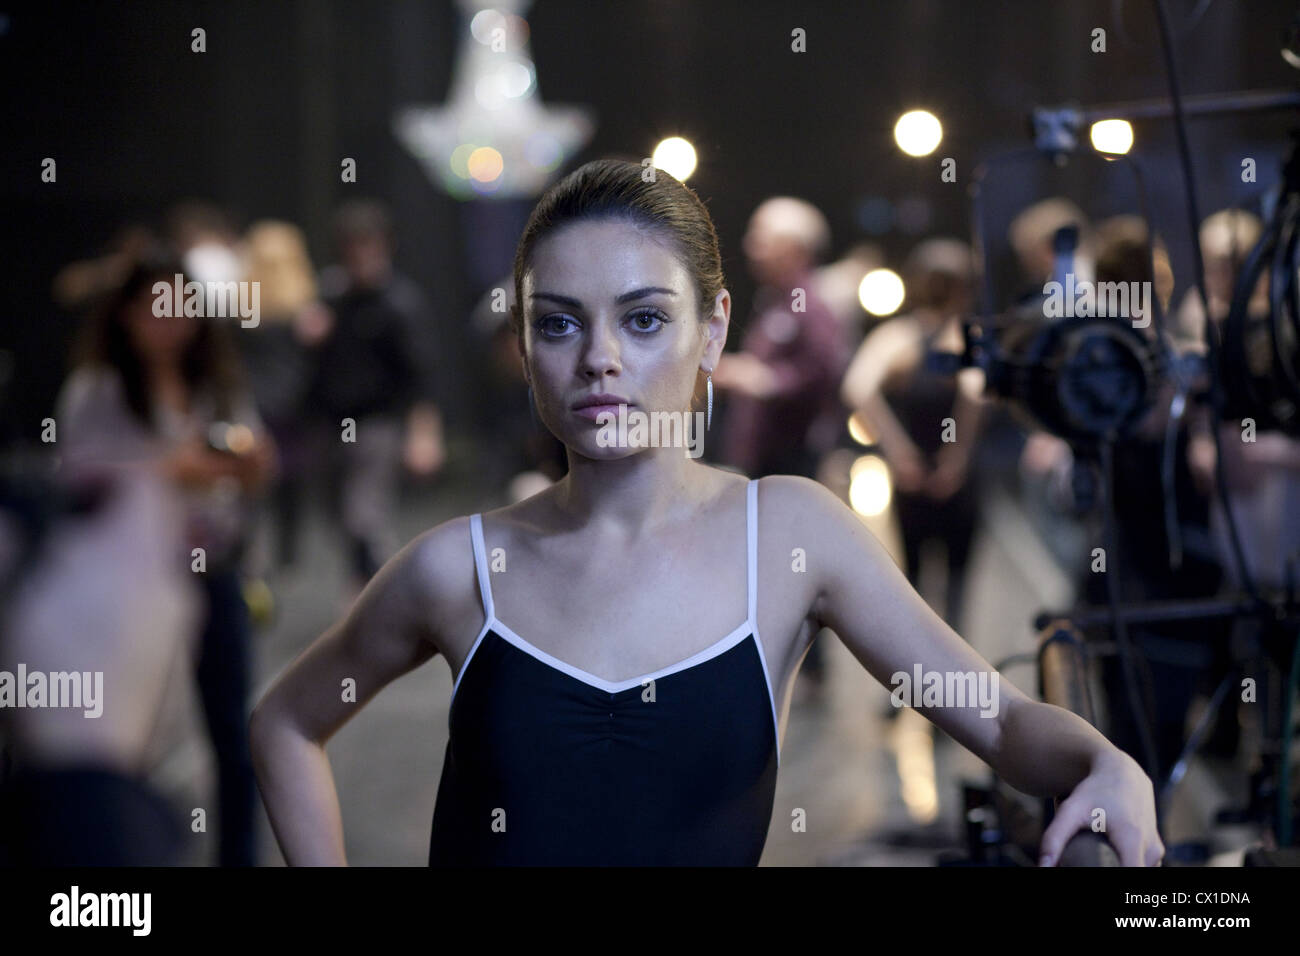 ITAR-TASS: MOSCOW, RUSSIA. FEBRUARY 3, 2011. Actress Mila Kunis as Lily in a scene from Darren Aronofsky's Black Swan, a psychological thriller in the world New York City ballet. (Photo